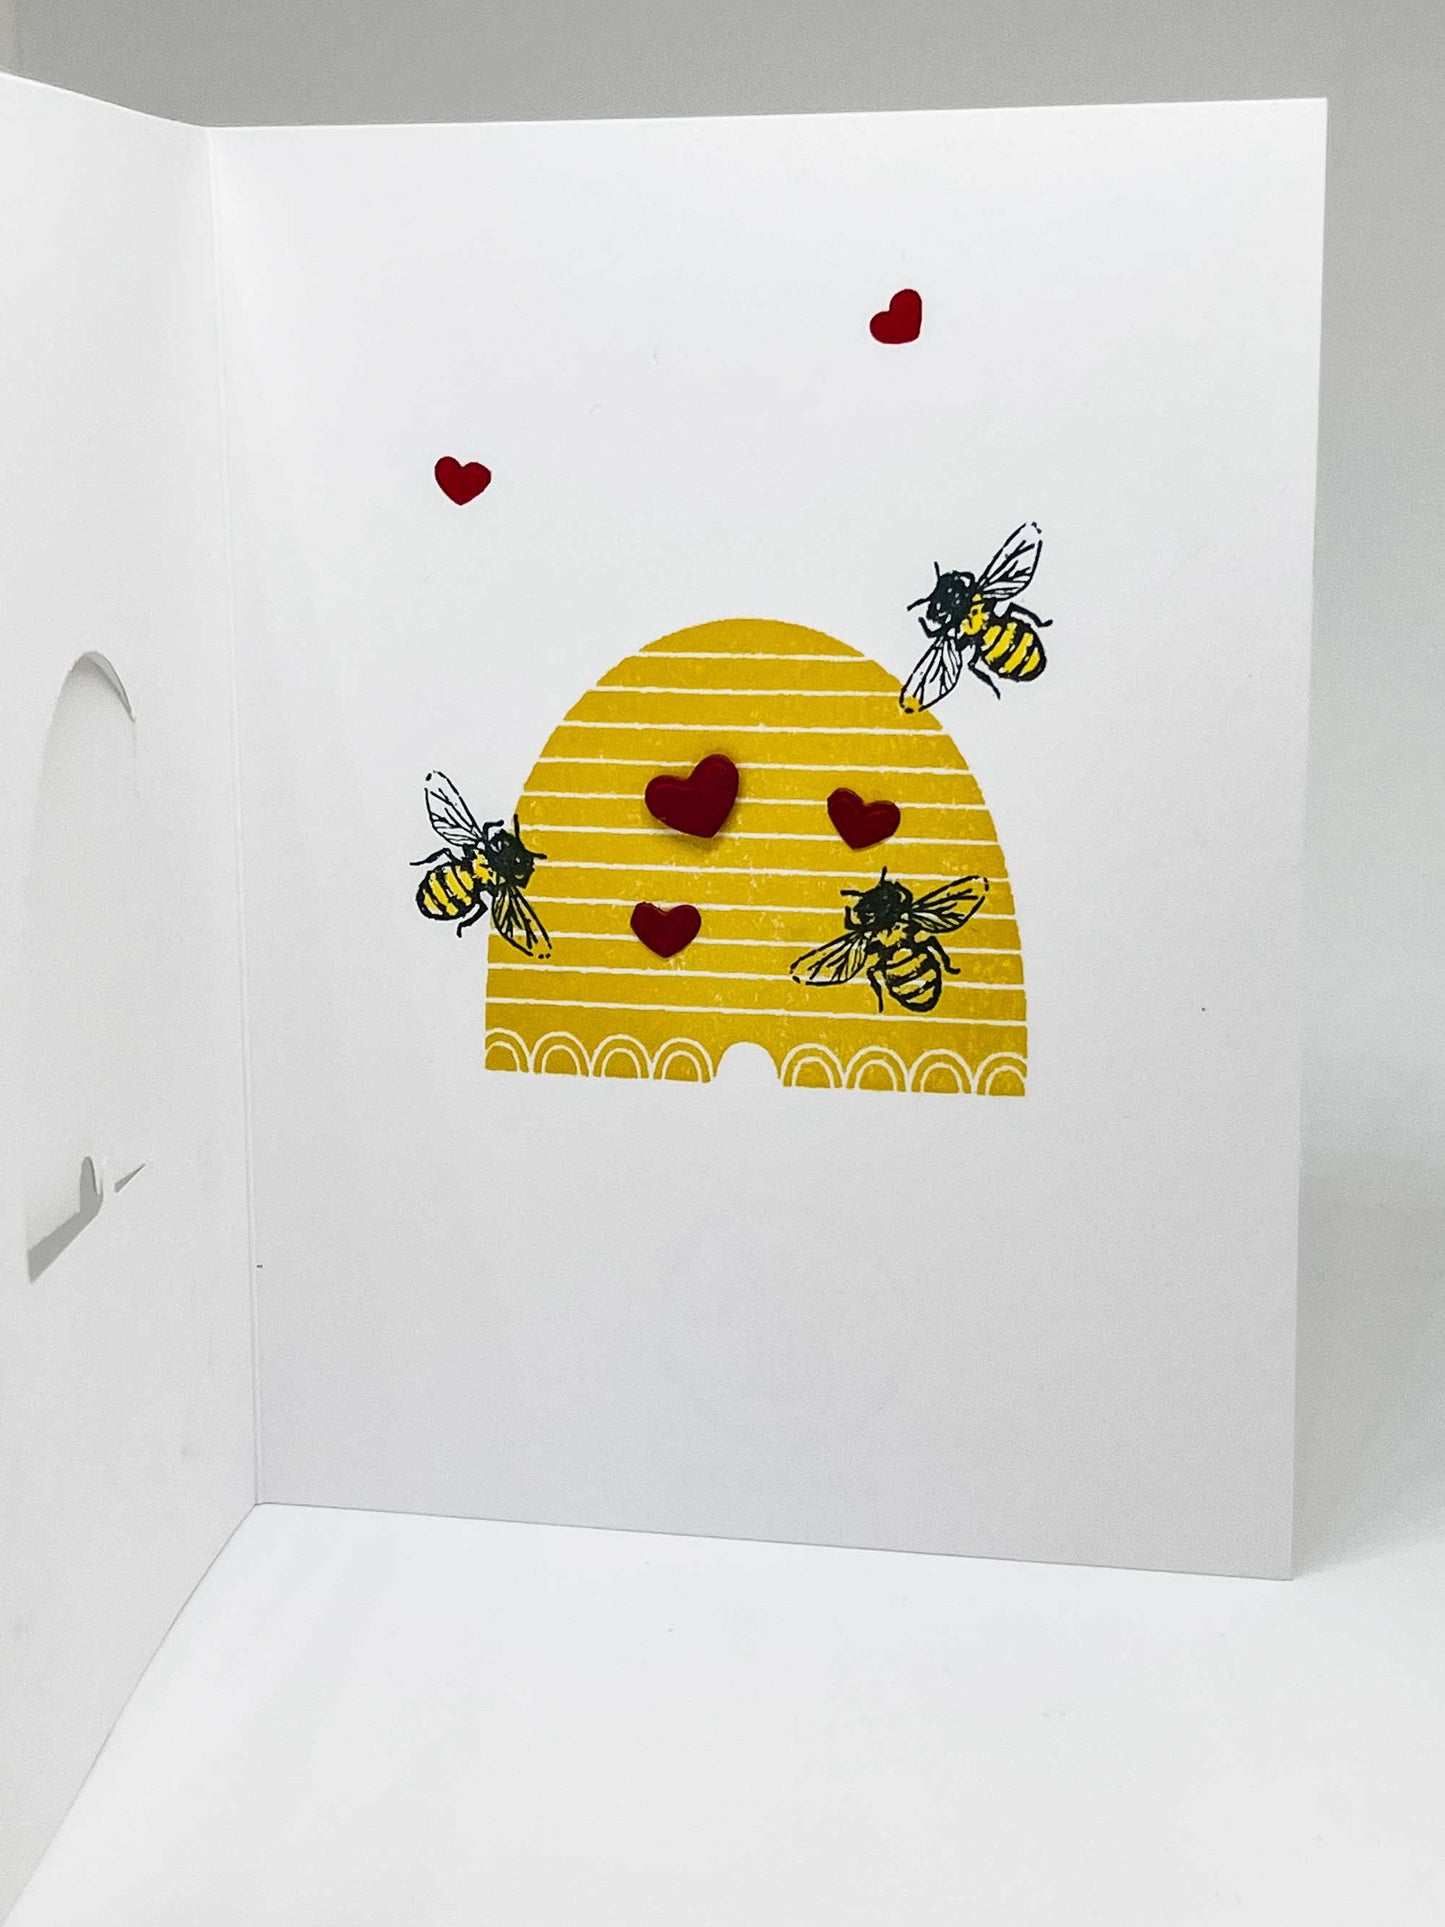 Inside pop-up greeting card with honeybees flying over hive surrounded by little red hearts